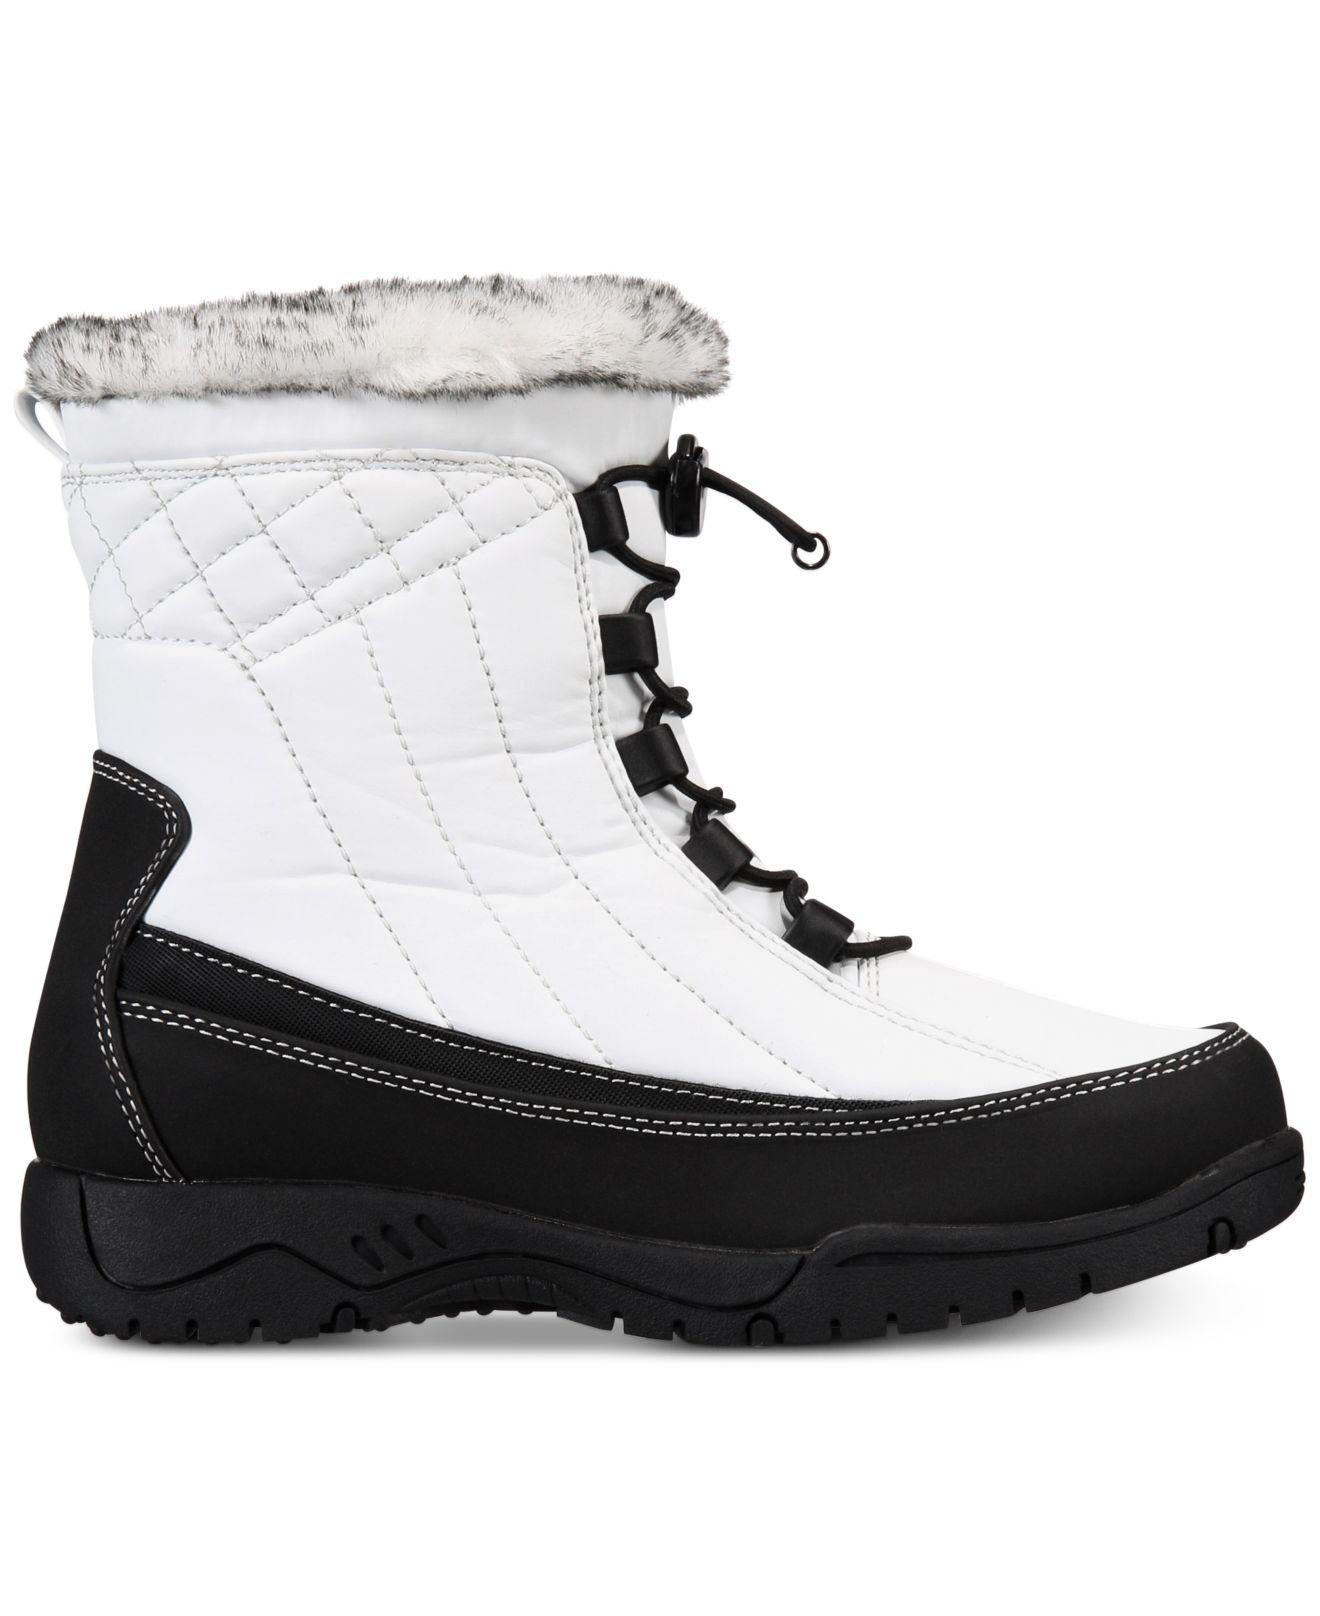 Sporto Jenny Water-resistant Boots in 